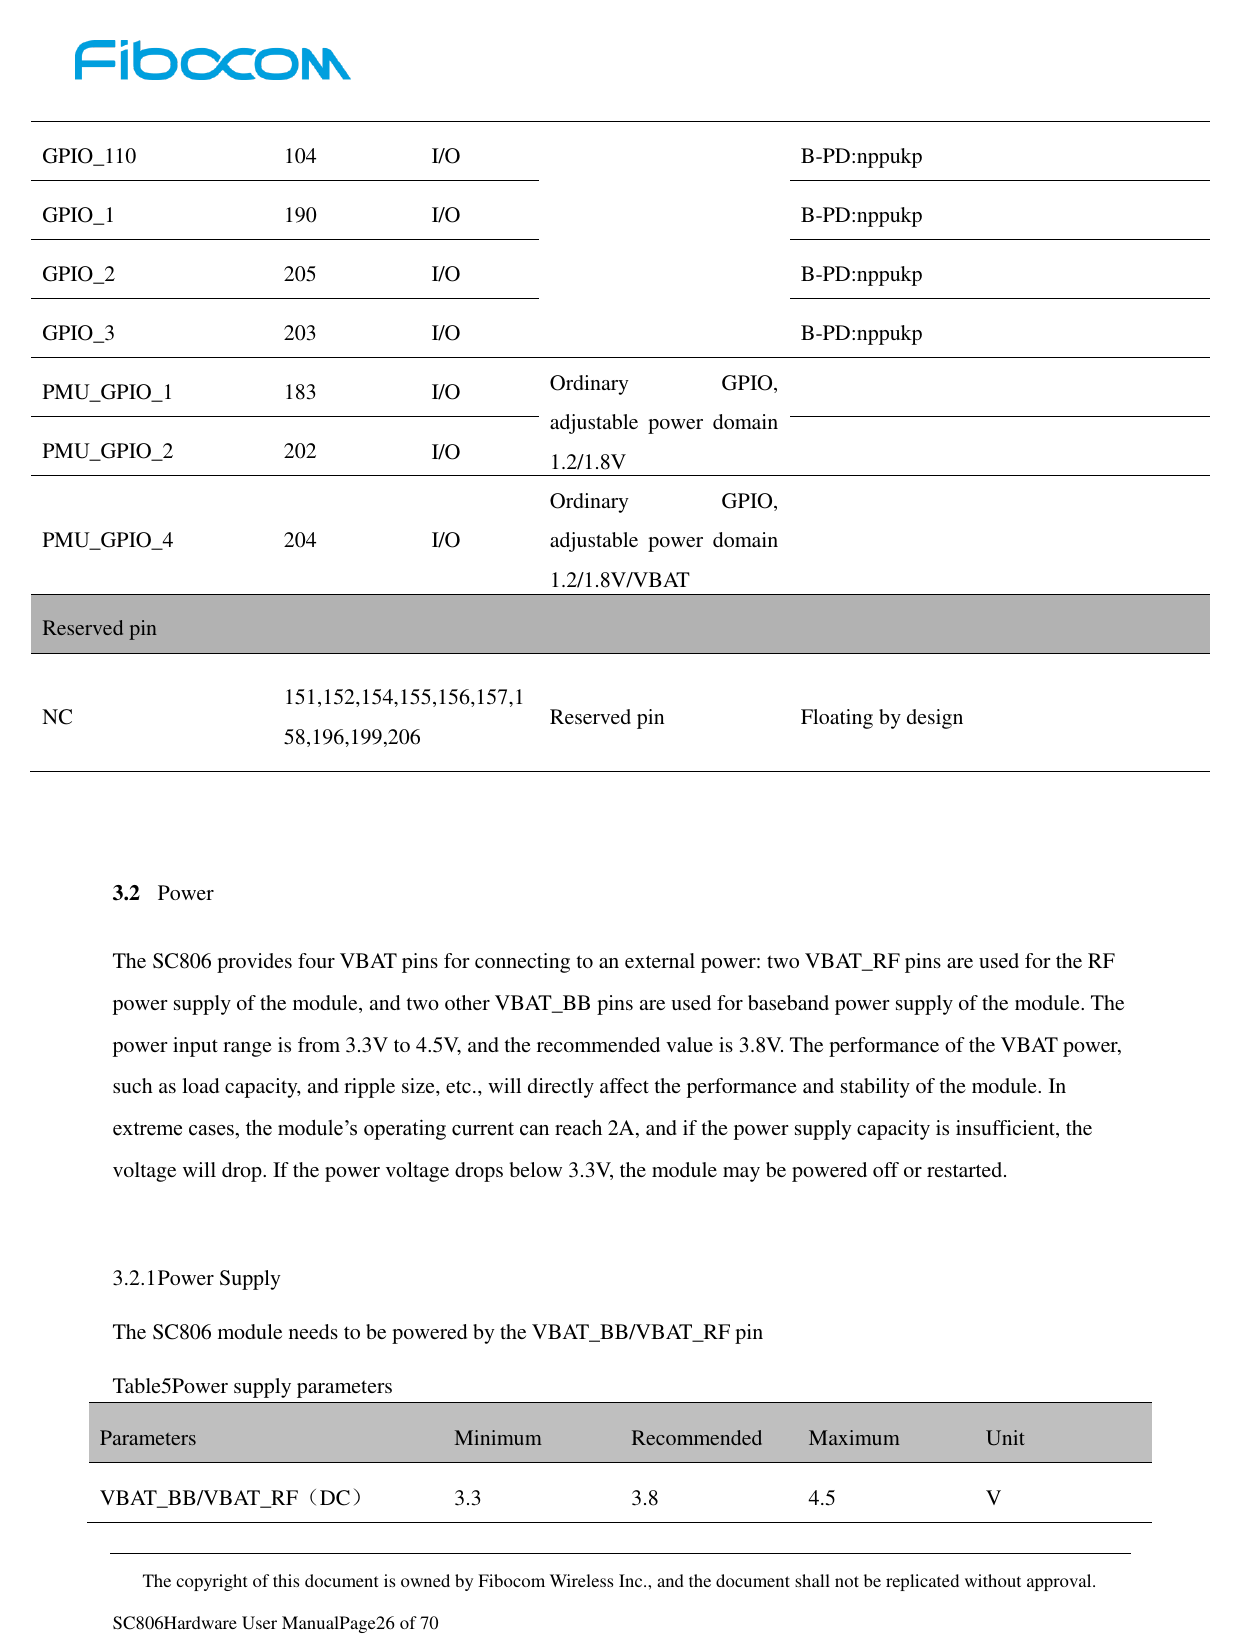     The copyright of this document is owned by Fibocom Wireless Inc., and the document shall not be replicated without approval.   SC806Hardware User ManualPage26 of 70 GPIO_110 104 I/O B-PD:nppukp GPIO_1 190 I/O B-PD:nppukp GPIO_2 205 I/O B-PD:nppukp GPIO_3 203 I/O B-PD:nppukp PMU_GPIO_1 183 I/O Ordinary  GPIO, adjustable  power  domain 1.2/1.8V  PMU_GPIO_2 202 I/O  PMU_GPIO_4 204 I/O Ordinary  GPIO, adjustable  power  domain 1.2/1.8V/VBAT  Reserved pin NC 151,152,154,155,156,157,158,196,199,206 Reserved pin Floating by design   3.2 Power The SC806 provides four VBAT pins for connecting to an external power: two VBAT_RF pins are used for the RF power supply of the module, and two other VBAT_BB pins are used for baseband power supply of the module. The power input range is from 3.3V to 4.5V, and the recommended value is 3.8V. The performance of the VBAT power, such as load capacity, and ripple size, etc., will directly affect the performance and stability of the module. In extreme cases, the module’s operating current can reach 2A, and if the power supply capacity is insufficient, the voltage will drop. If the power voltage drops below 3.3V, the module may be powered off or restarted.  3.2.1 Power Supply The SC806 module needs to be powered by the VBAT_BB/VBAT_RF pin Table5Power supply parameters Parameters Minimum Recommended   Maximum Unit VBAT_BB/VBAT_RF（DC） 3.3 3.8 4.5   V 